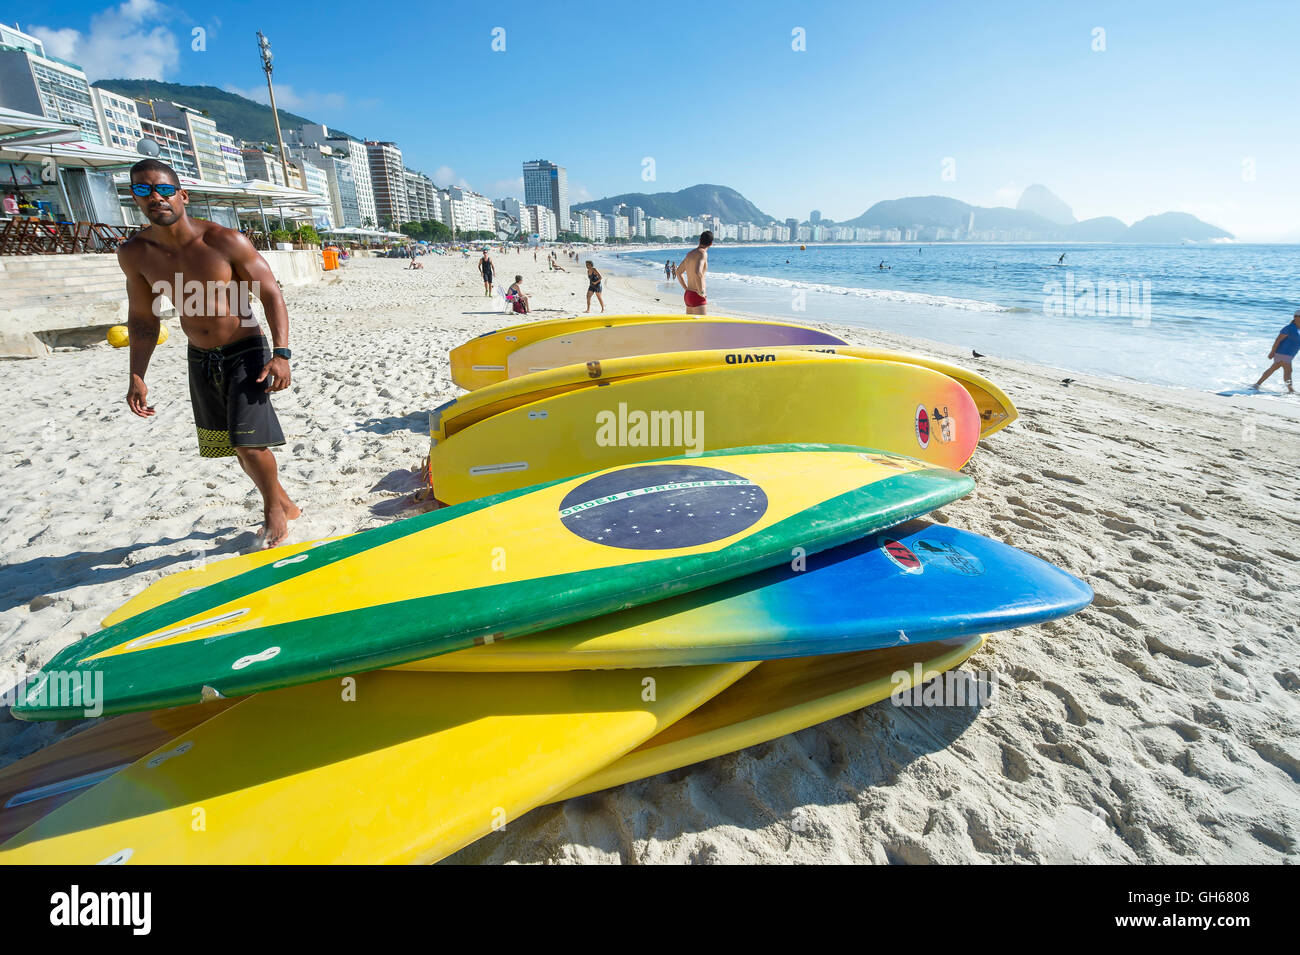 RIO DE JANEIRO - APRIL 5, 2016: A worker sets out stand up paddle surfboards for rental customers on Copacabana Beach. Stock Photo